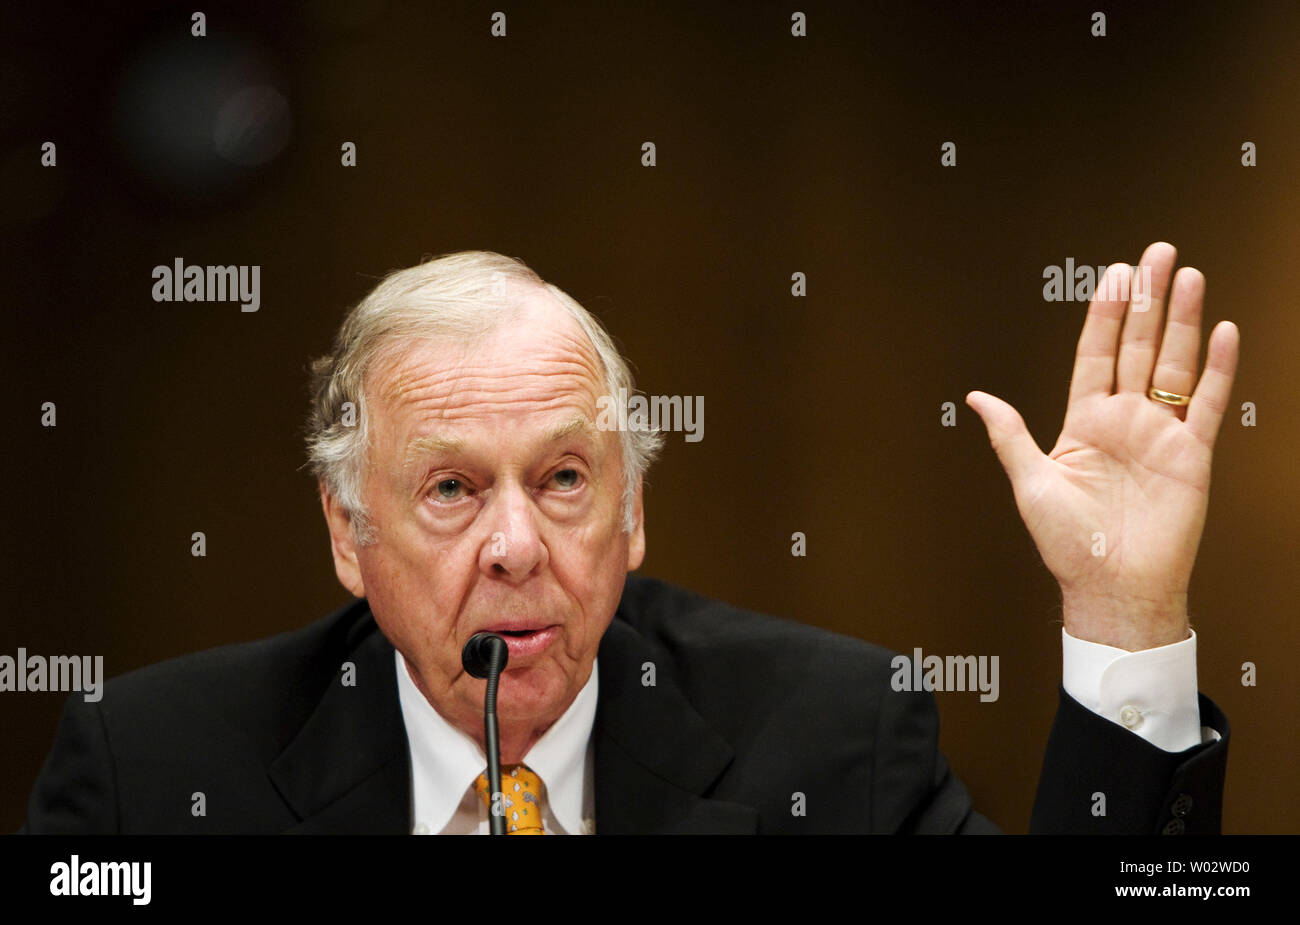 Oil billionaire T. Boone Pickens testifies before the Senate Homeland Security and Governmental Affairs Committee about alternative energy plans for the United States on July 22, 2008 on Capitol Hill in Washington. After making billions of dollars as an oil speculator, Pickens wants to promote the use of American technology, including wind turbines, and alternative energy to reduce the U.S. dependency on foreign oil. (UPI Photo/Patrick D. McDermott) Stock Photo